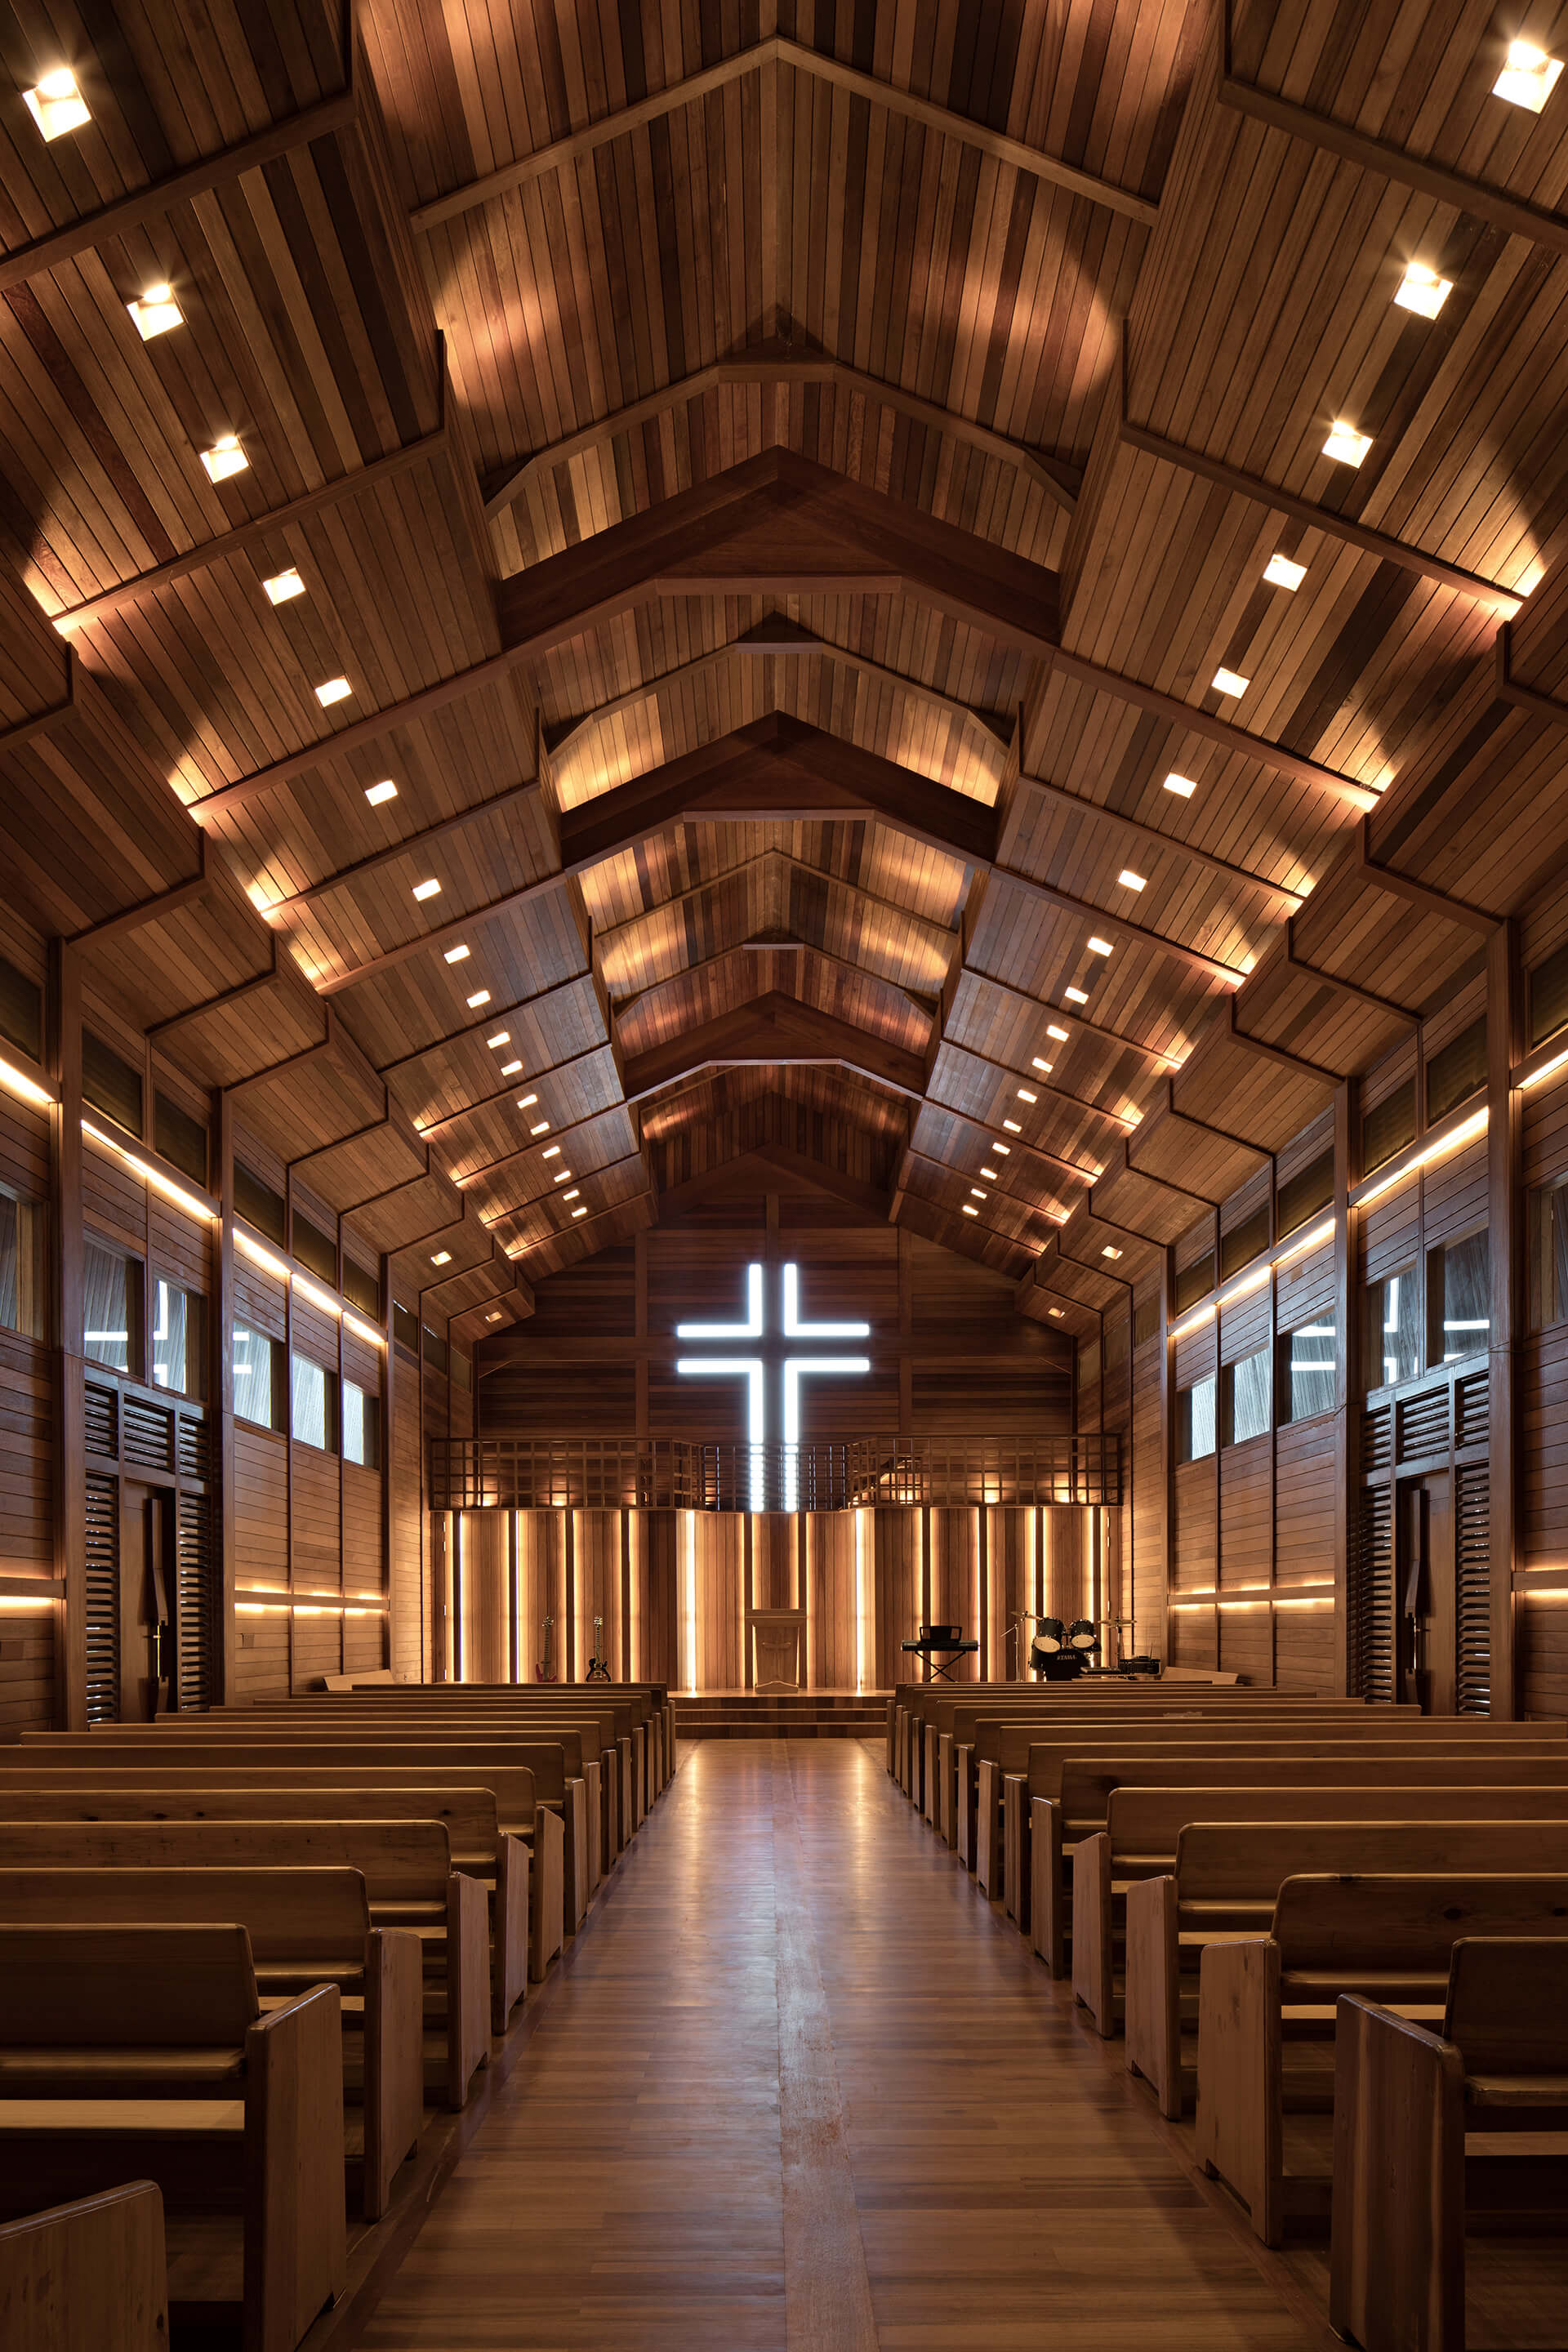 TSDS Interior Architects  Chooses Timber To Complete The Construction of Oikumene Church in Indonesia